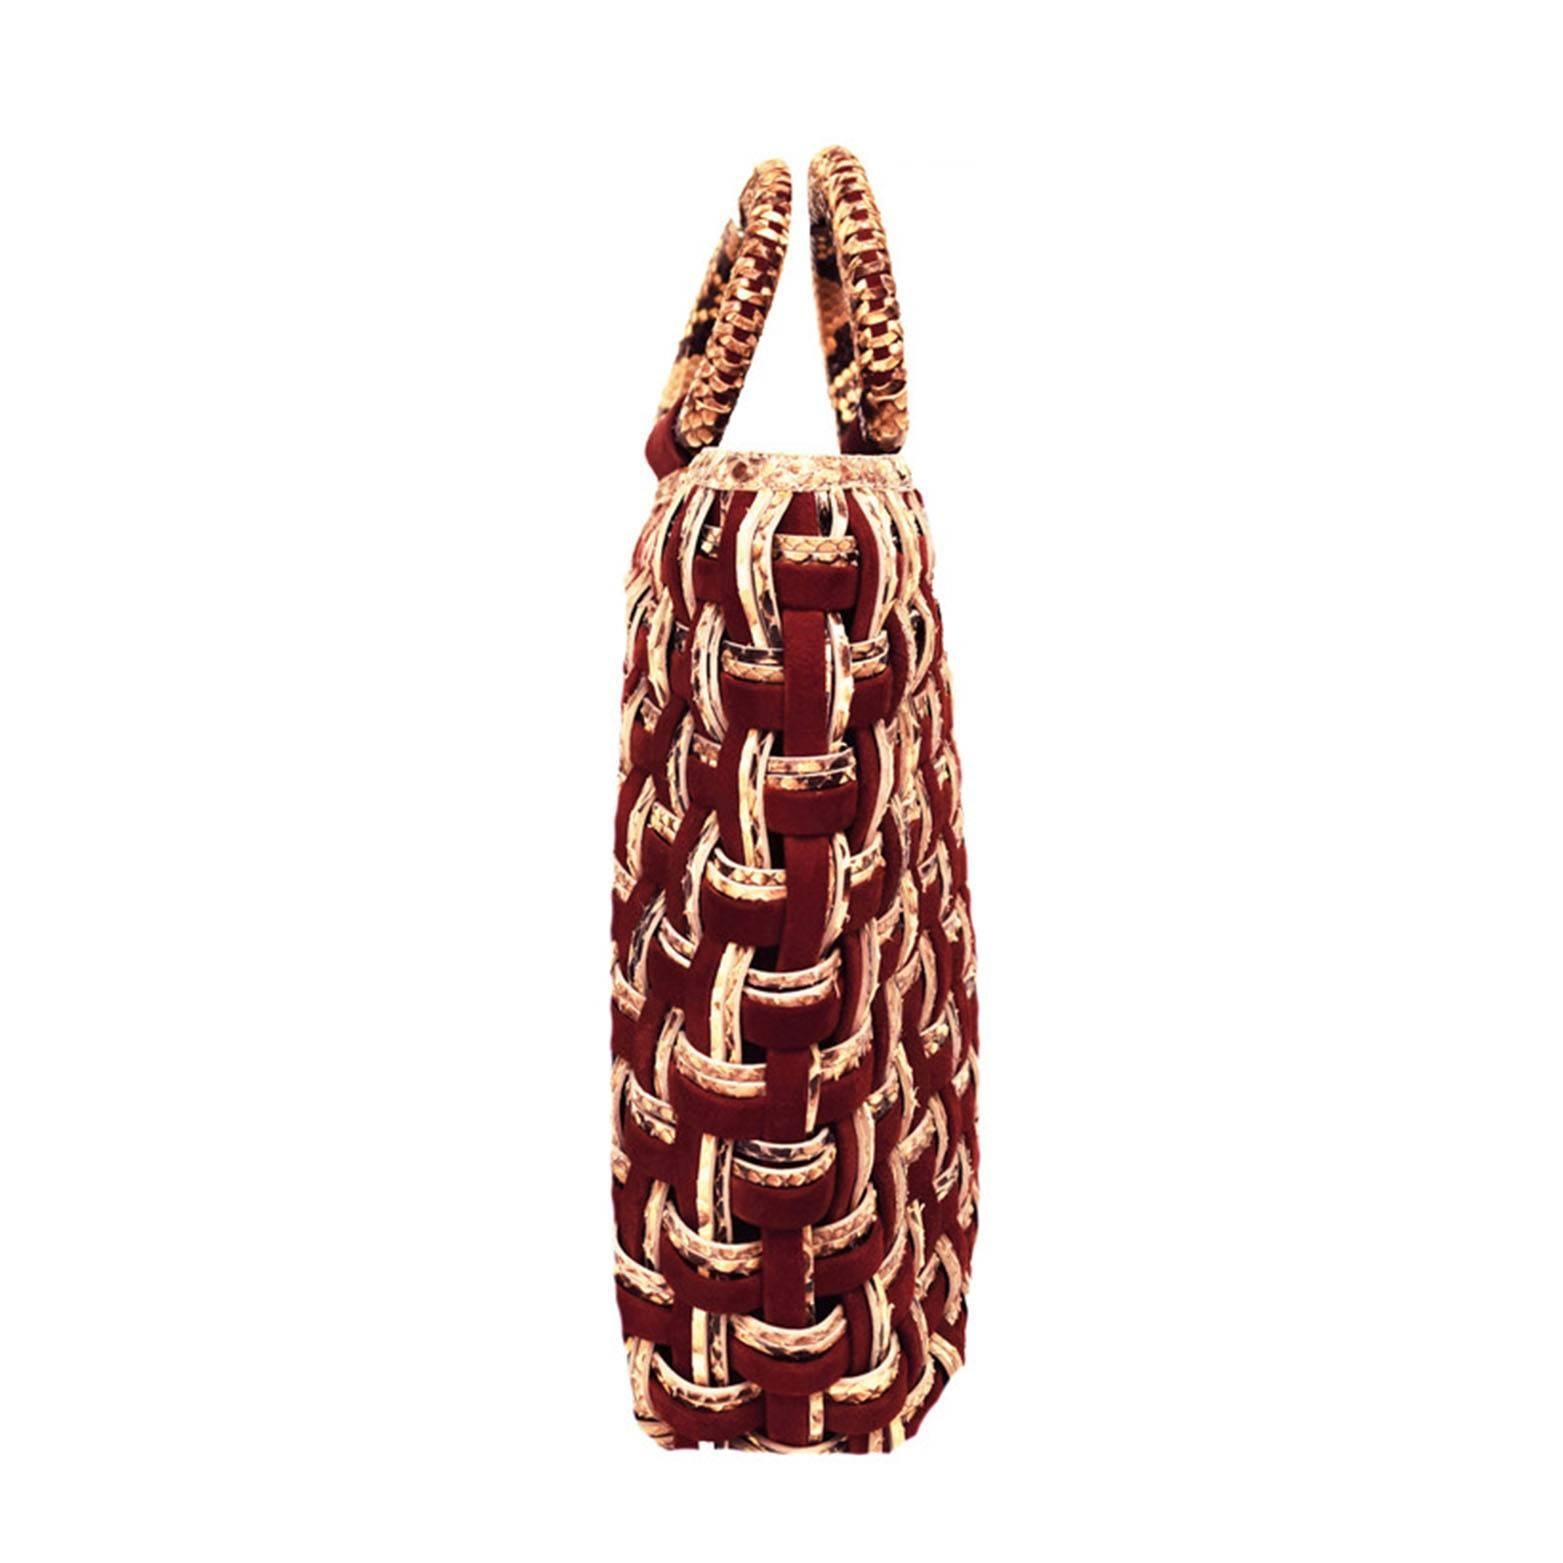 This Nancy Gonzalez woven handbag is one of a kind and hard to find. Made with Merlot suede and neutral colored snakeskin leather weaving a beautiful contrast. 3 inch strap drop. Fabric inside.